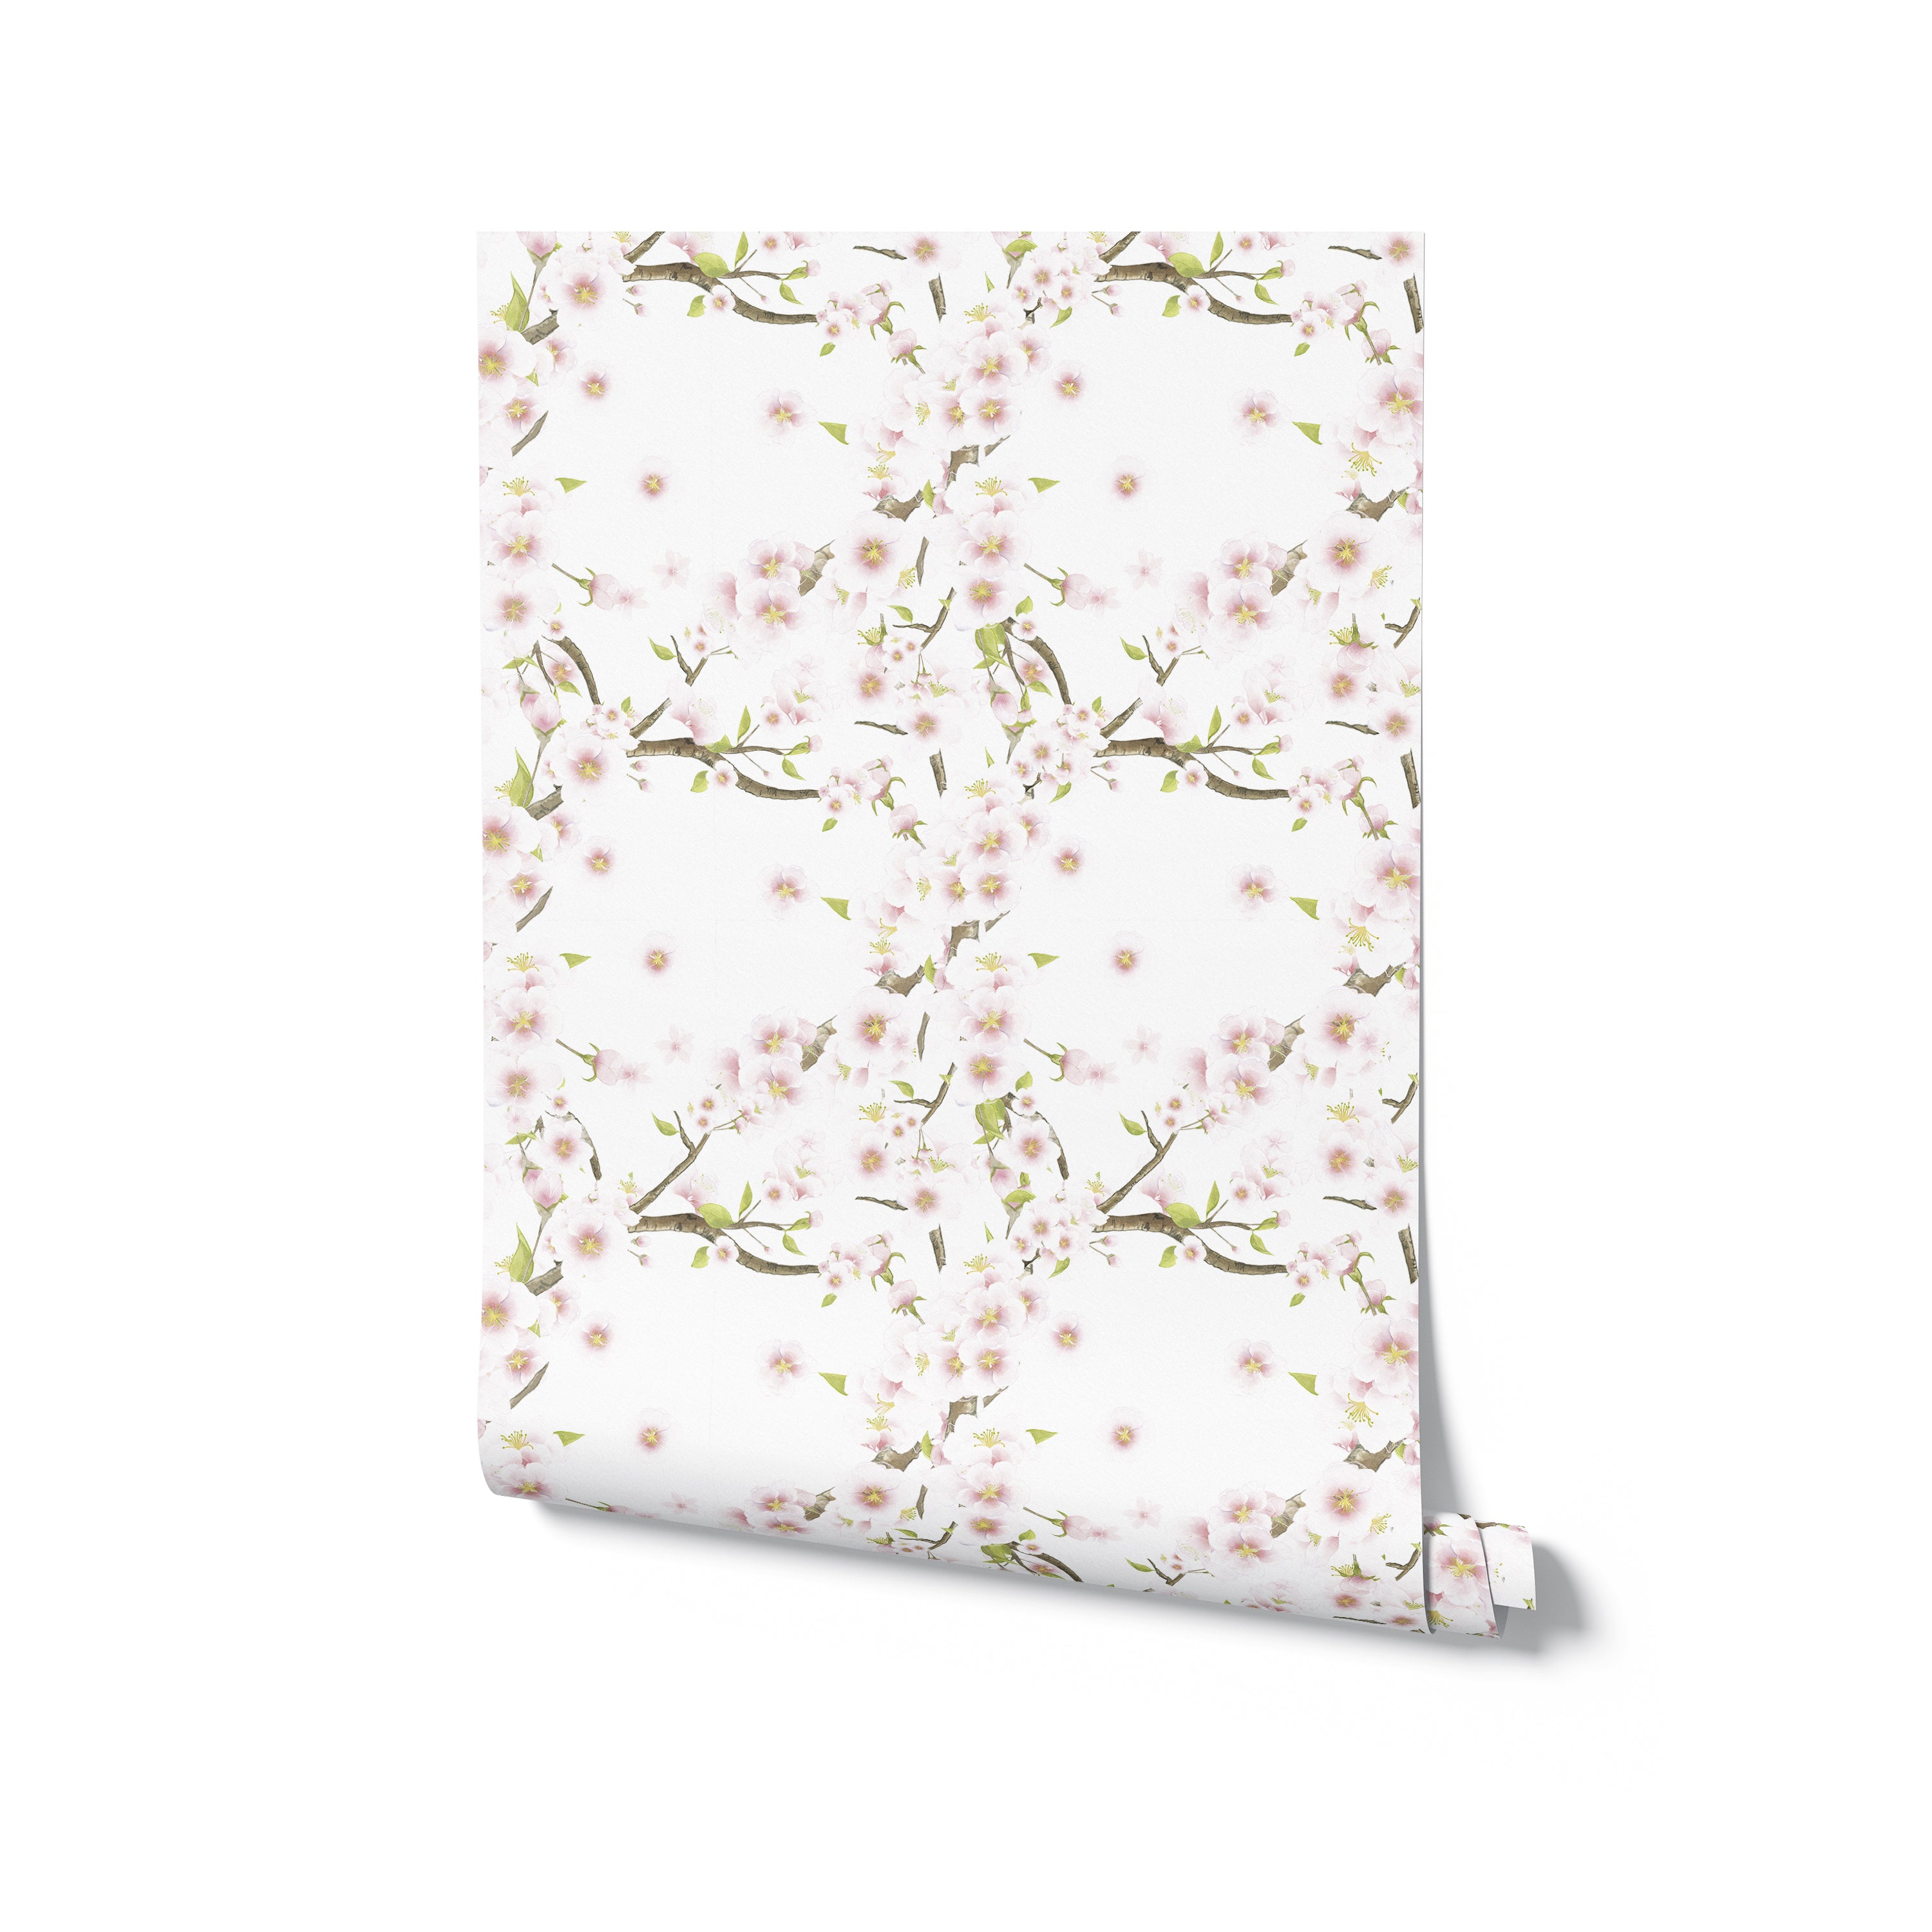 Sakura Wallpaper roll displaying a seamless pattern of pink cherry blossoms and green leaves on a white background, perfect for adding a touch of nature to any room